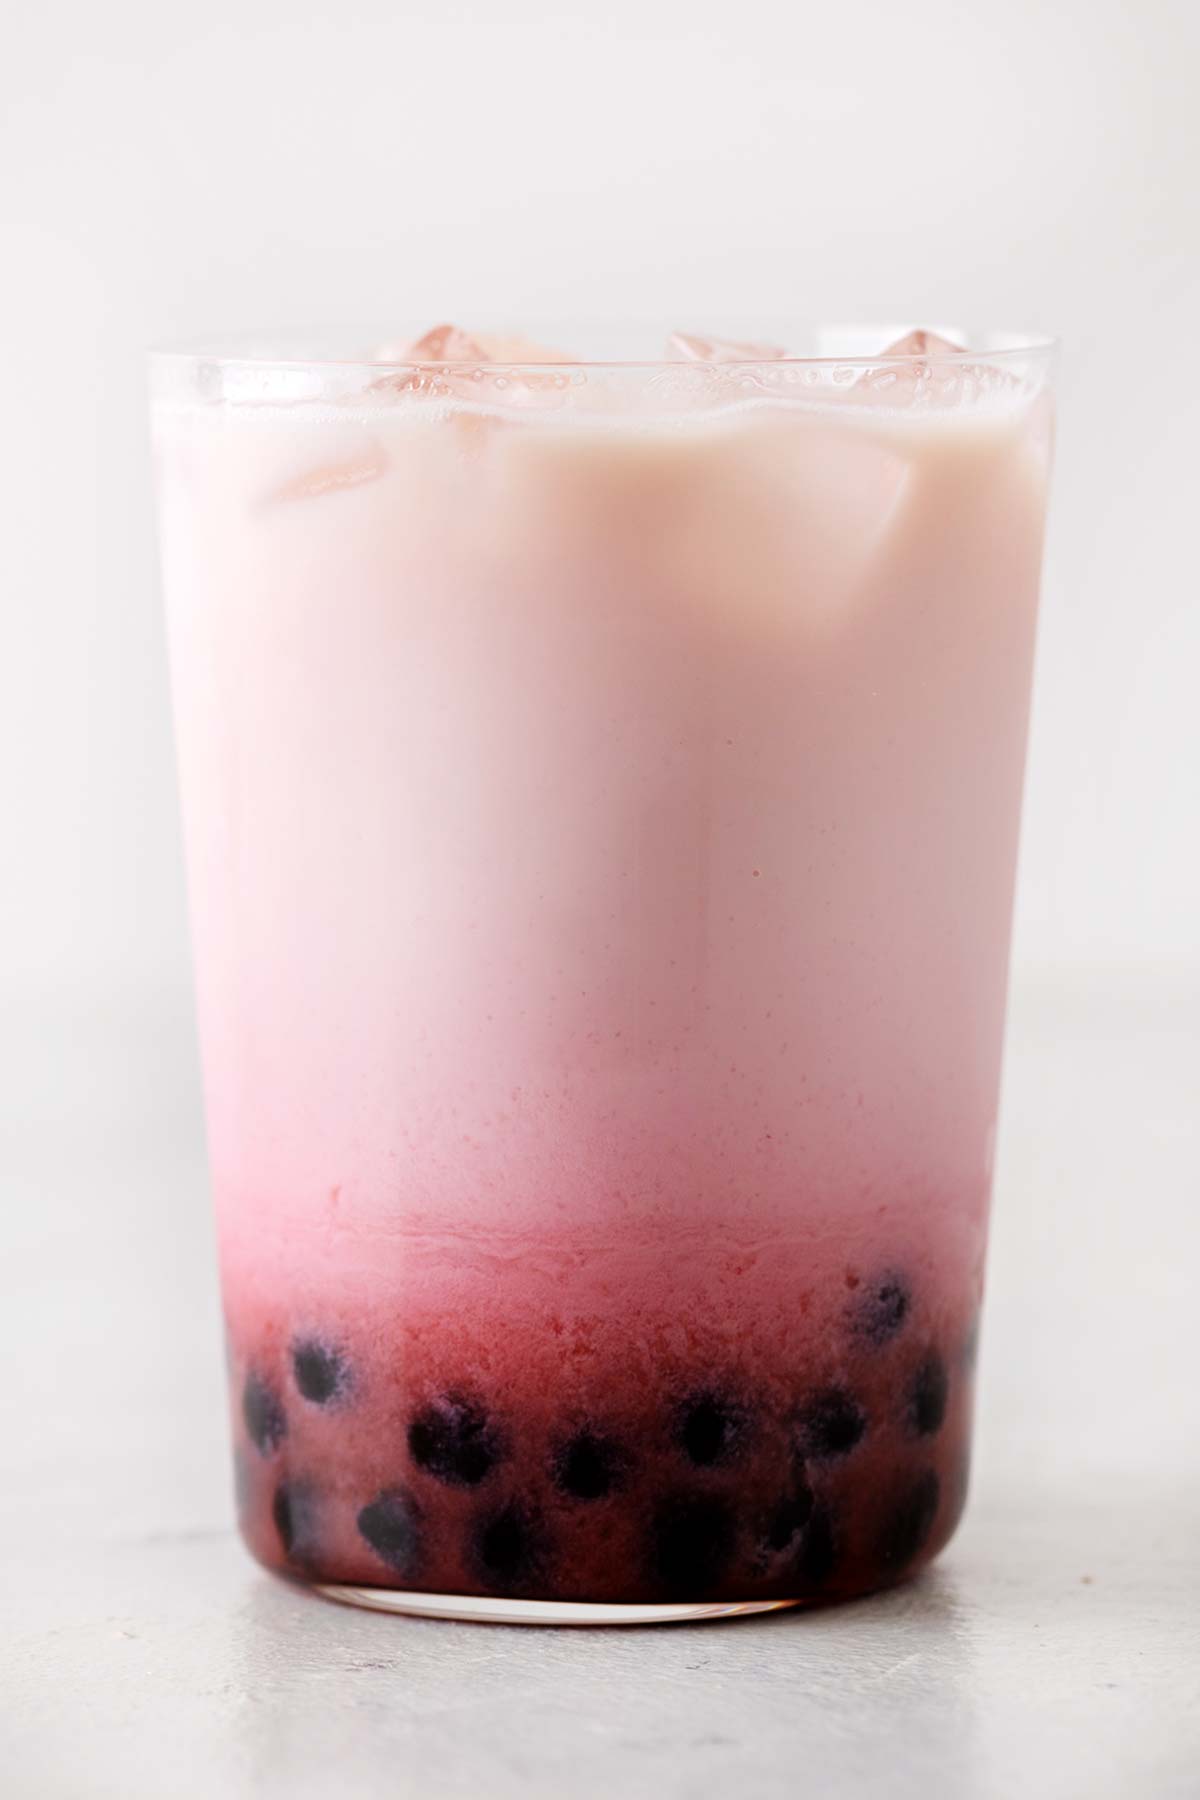 Strawberry milk tea in a glass cup with boba at the bottom of the cup.